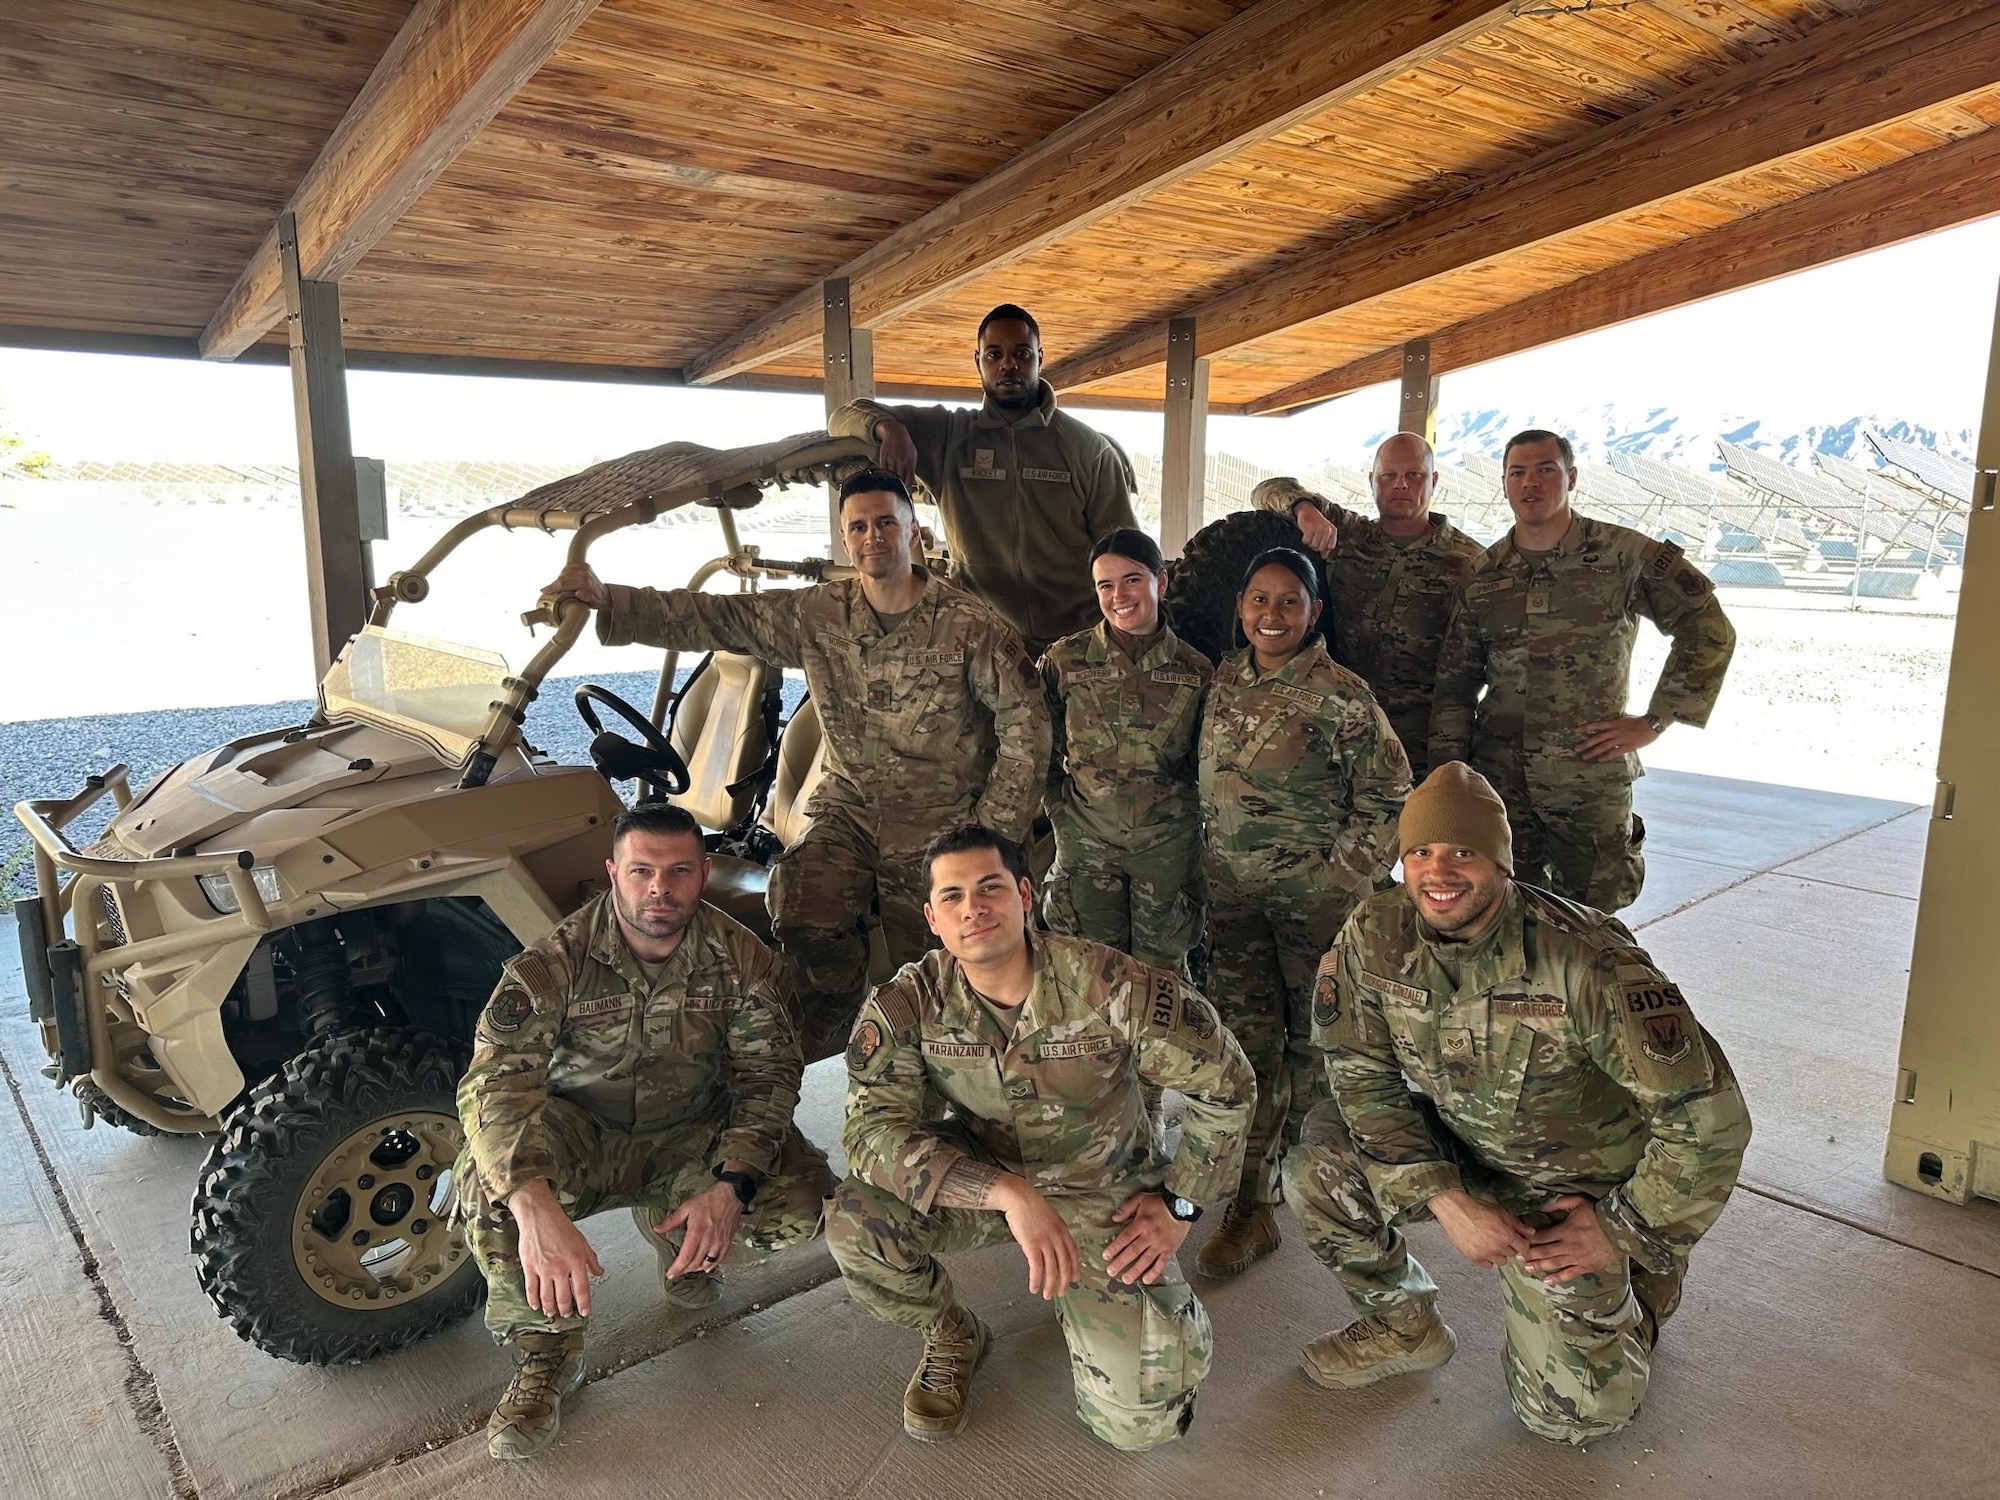 Guardsmen with the 105th Base Defense Squadron pose in front of an MRZR off road vehicle.